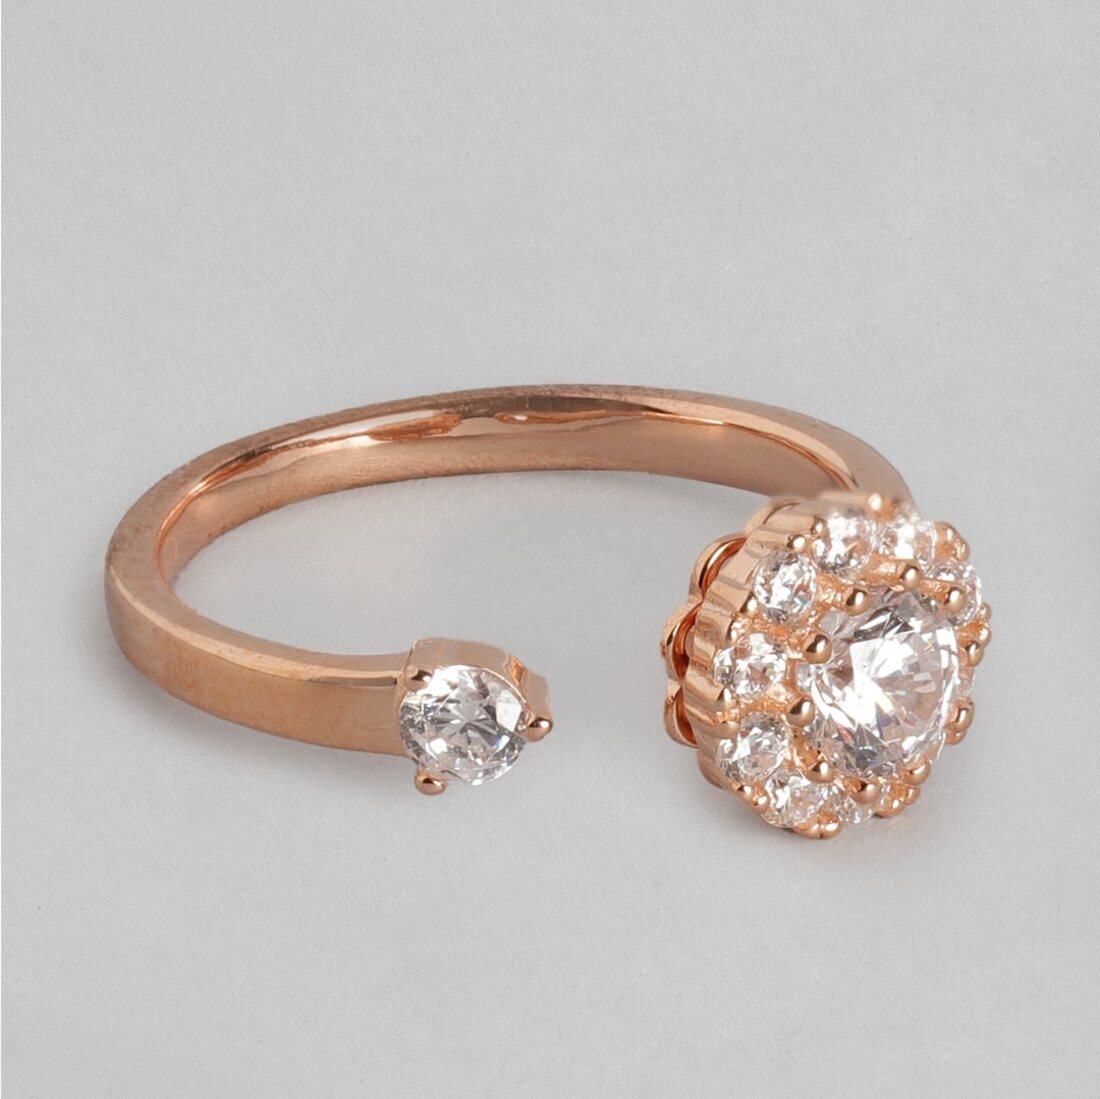 Bosslady 925 Silver Rotating Ring in Rose Gold (Adjustable)